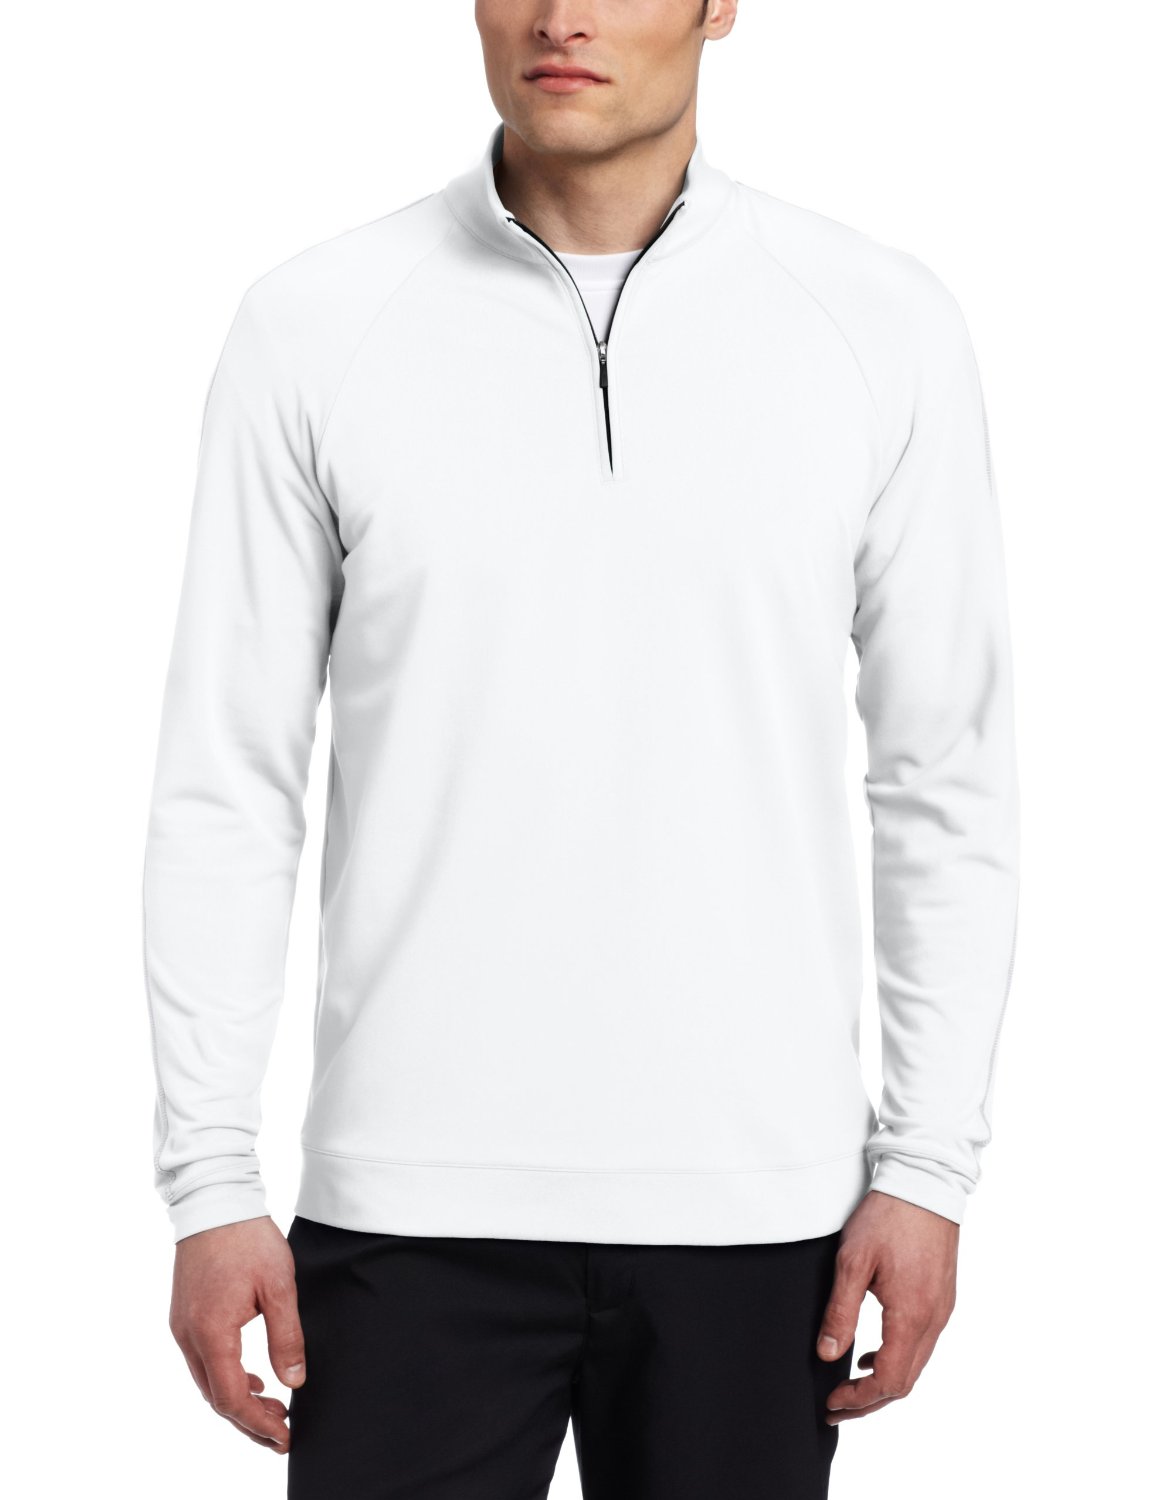 Mens Adidas Climalite Contrast Stitch Golf Pullovers